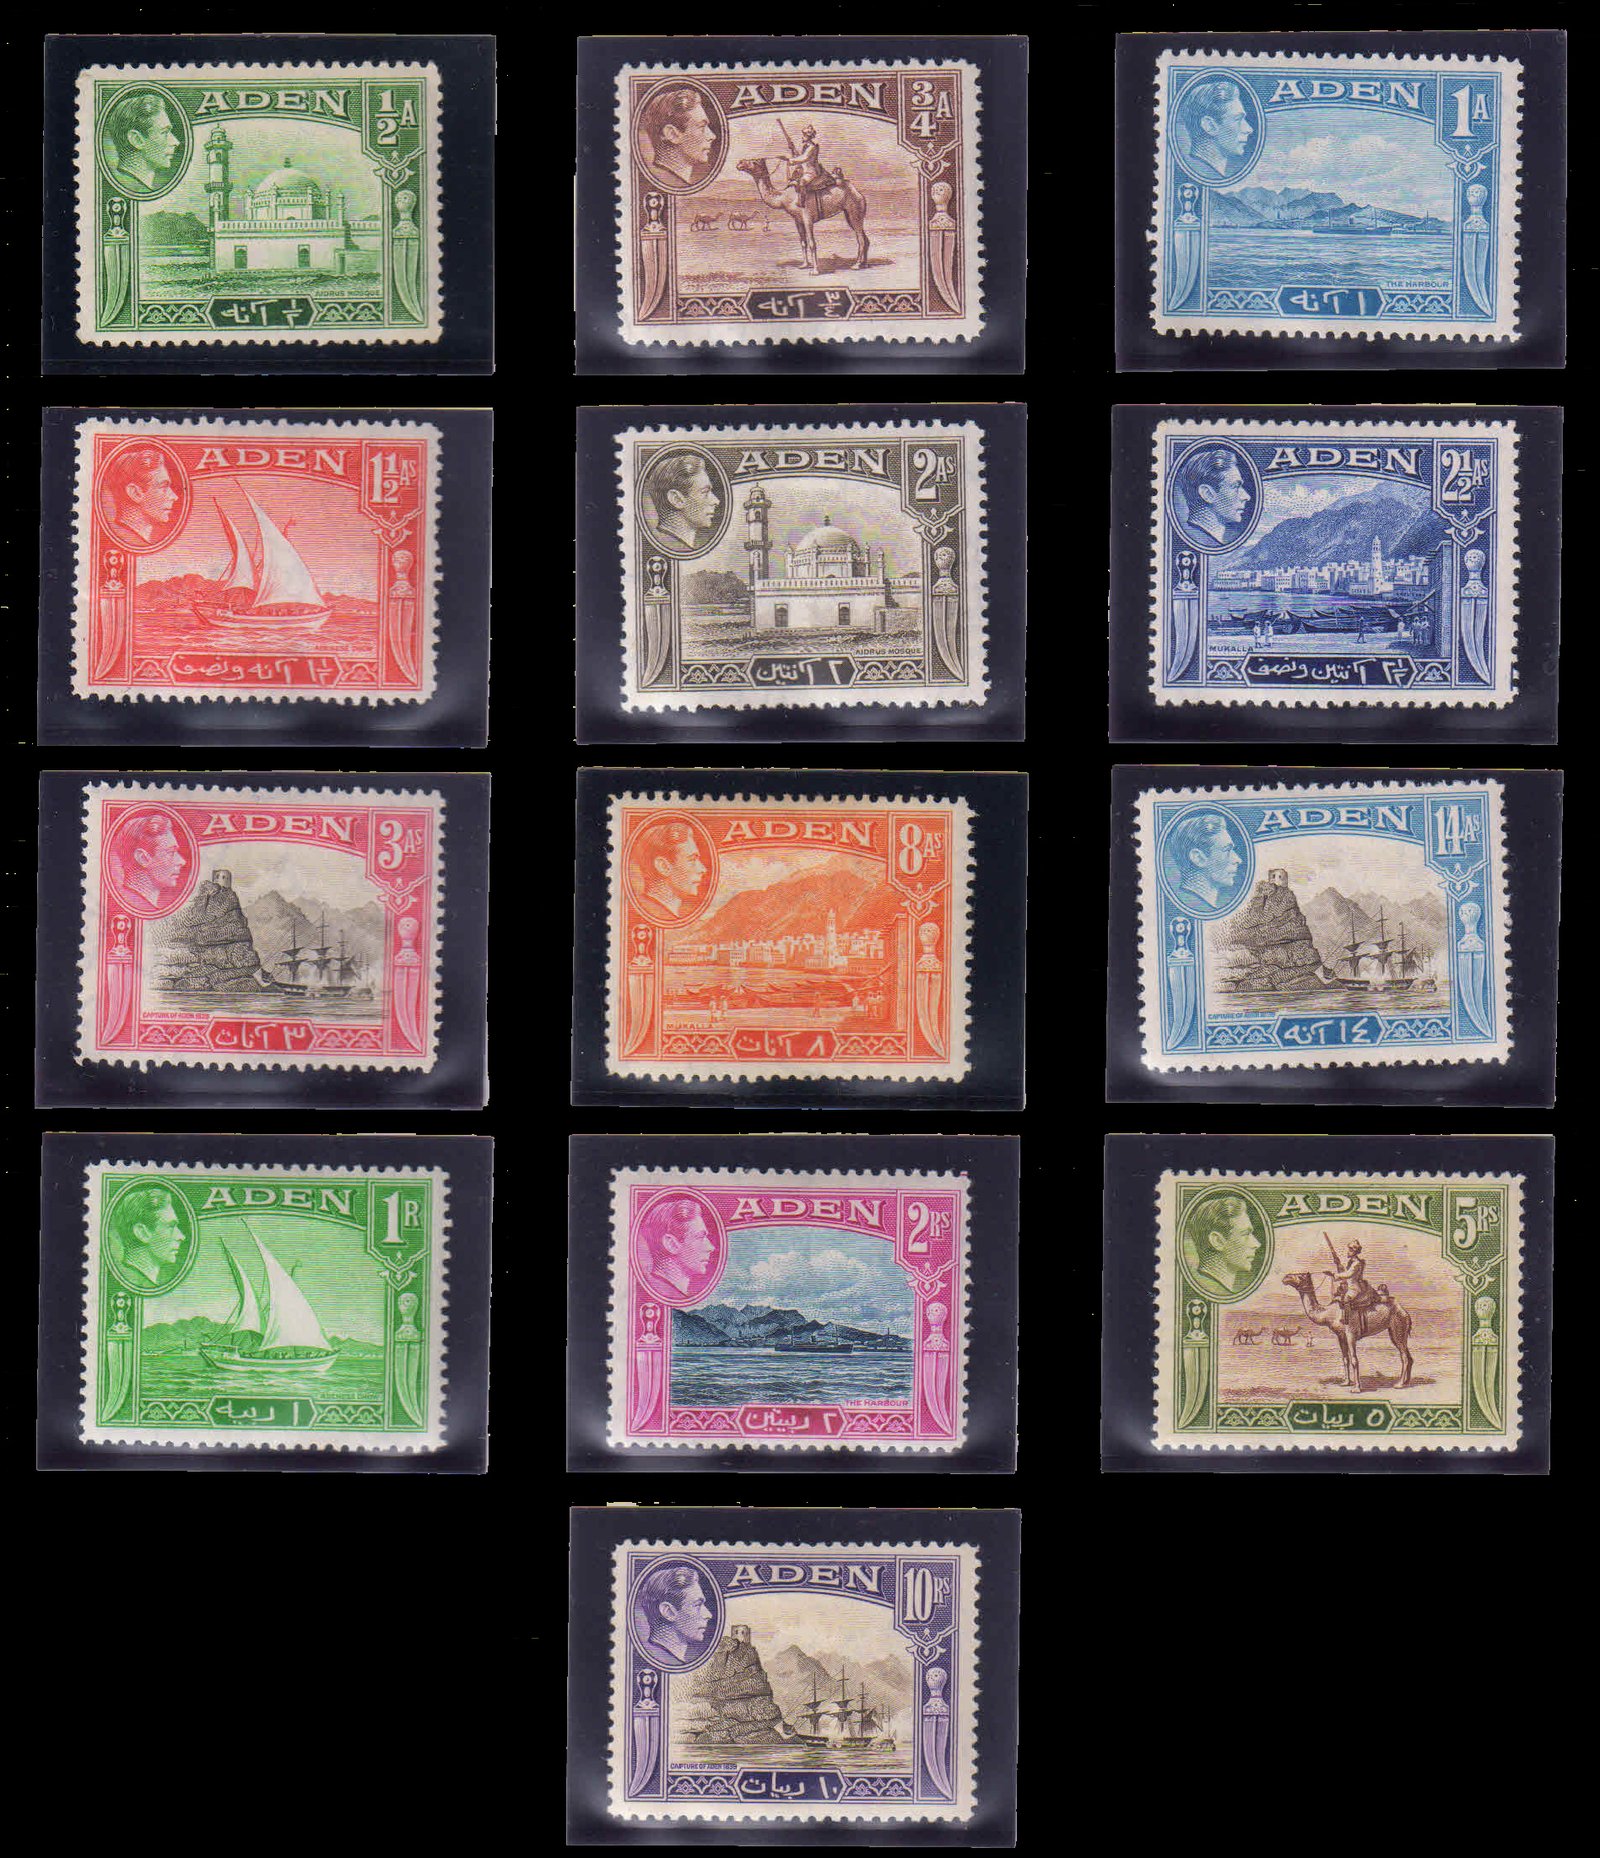 ADEN 1939-King George VI, Thematic Pictorial Series, Camel, Mosque, Forts, Set of 13-Mint Hinged, Cat � 135-S.G. 16-27